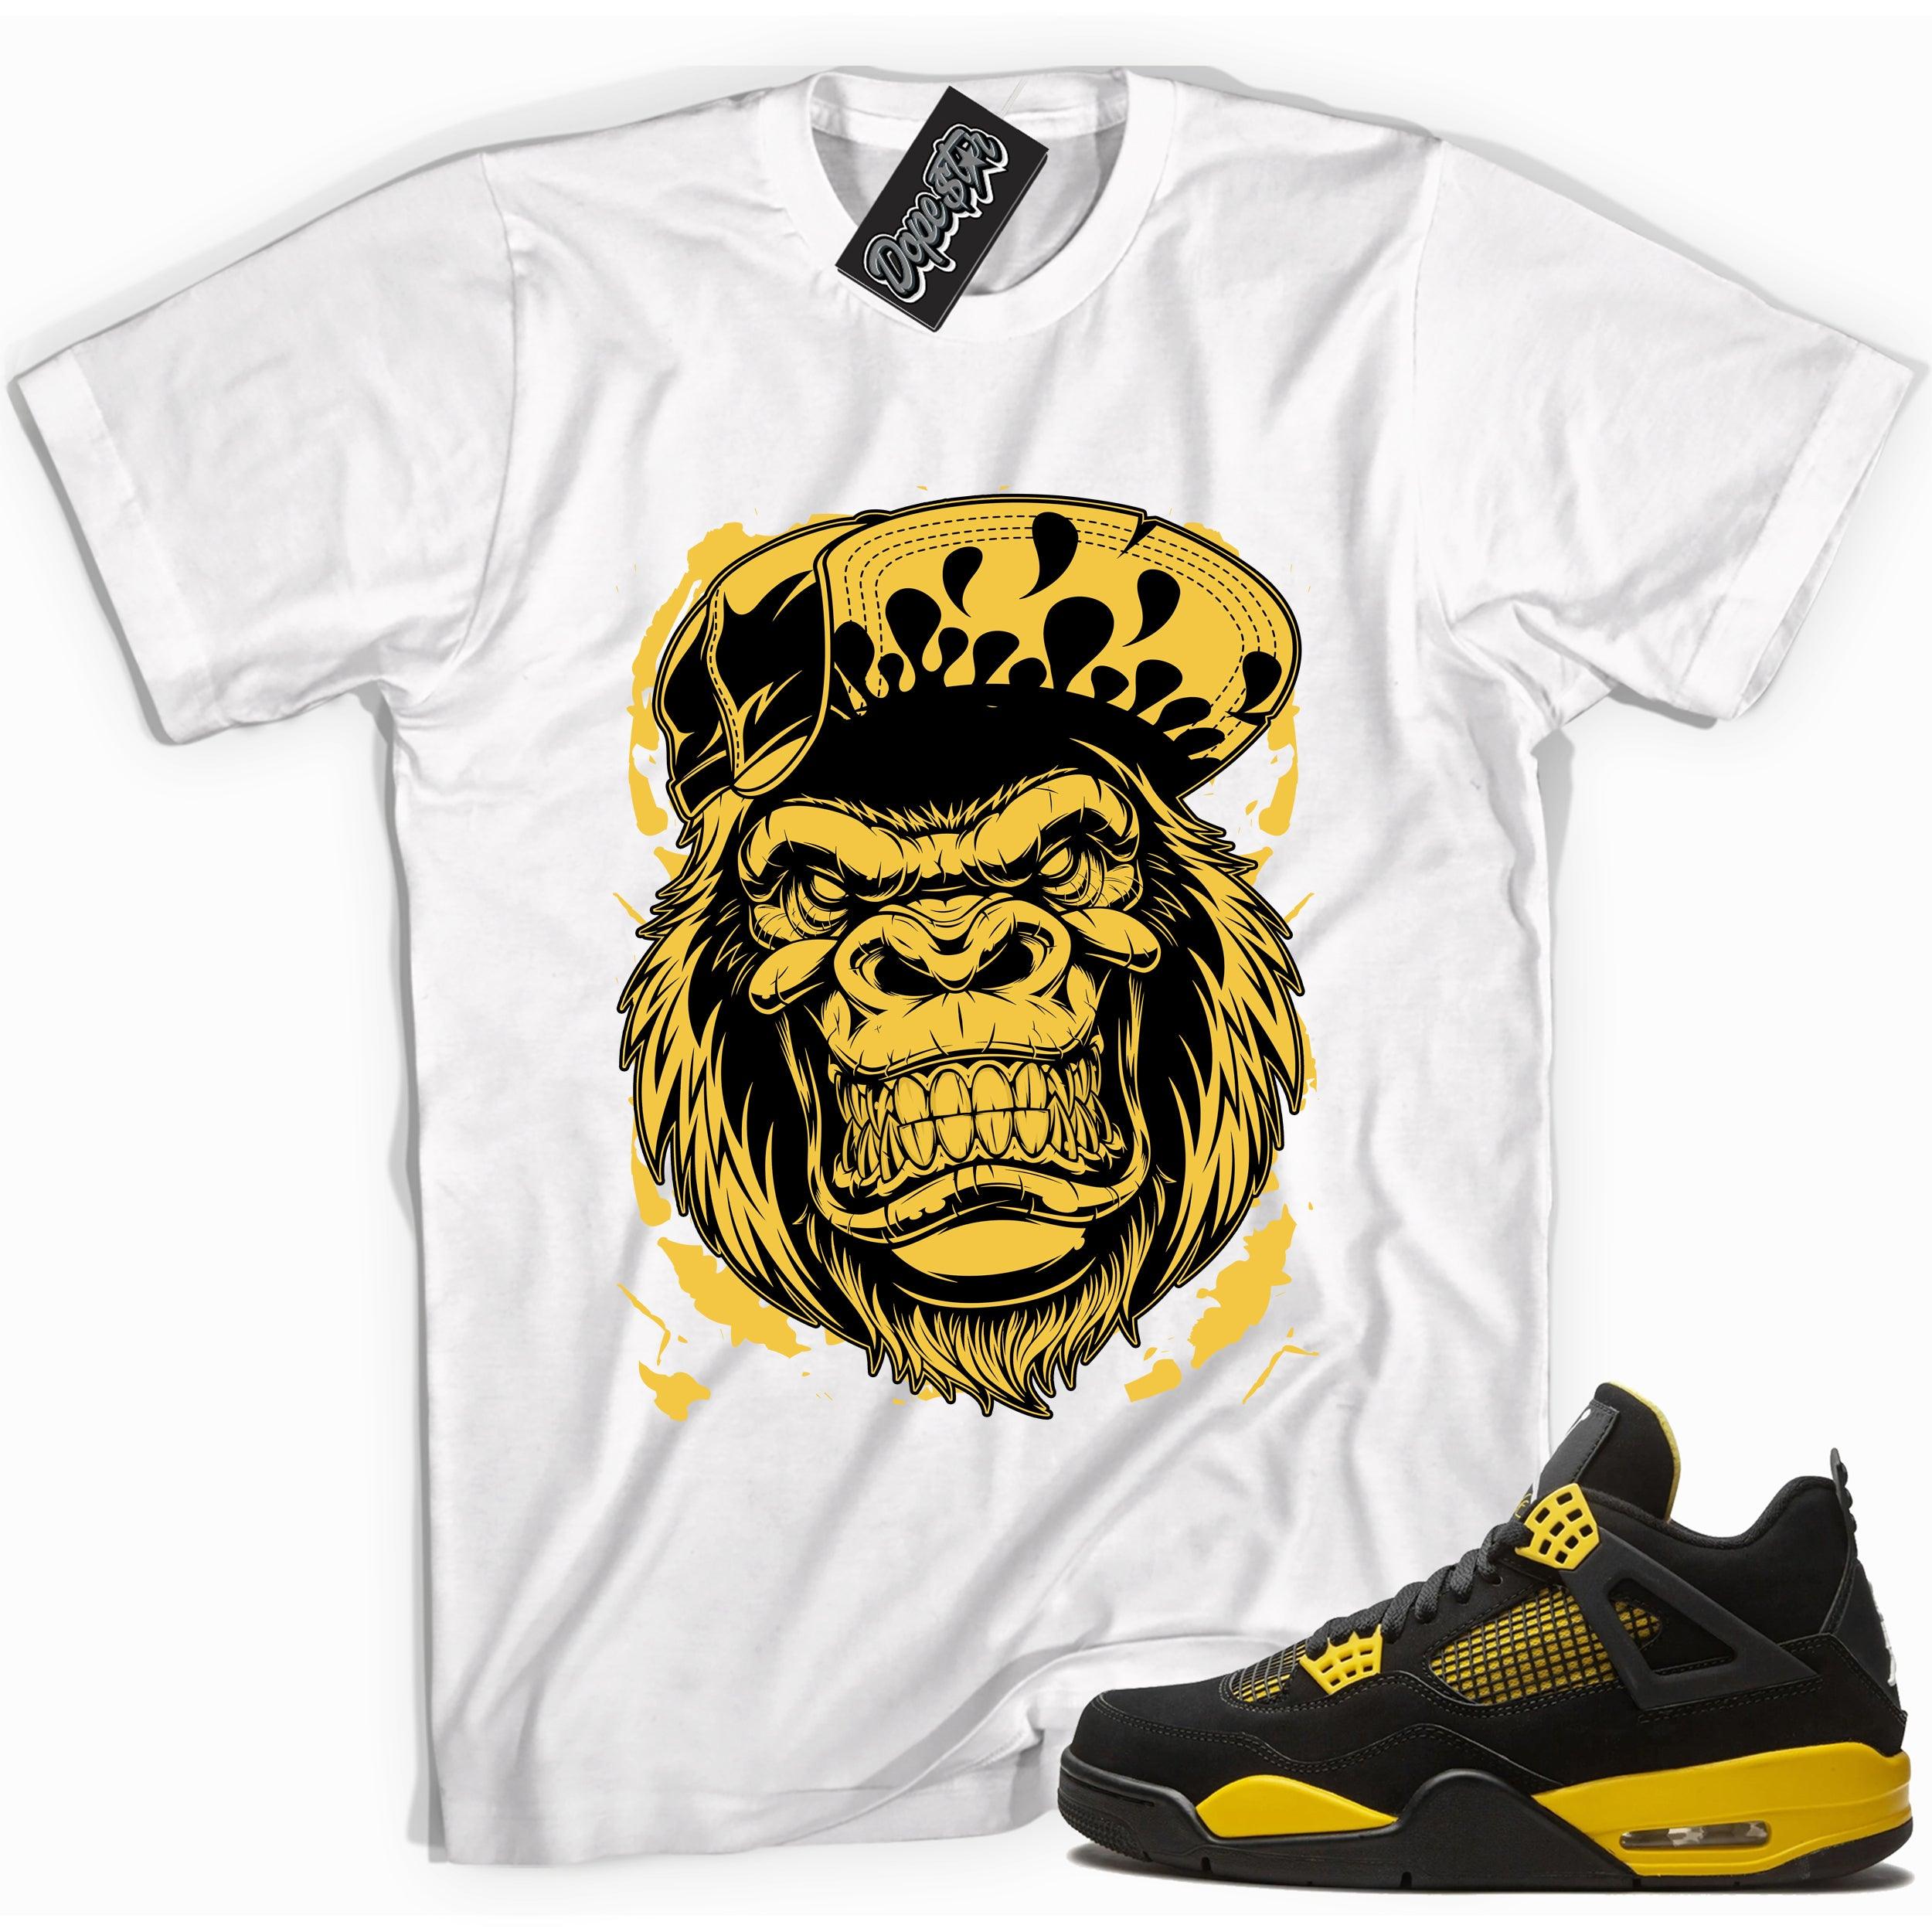 Cool white  graphic tee with 'gorilla beast' print, that perfectly matches Air Jordan 4 Thunder sneakers